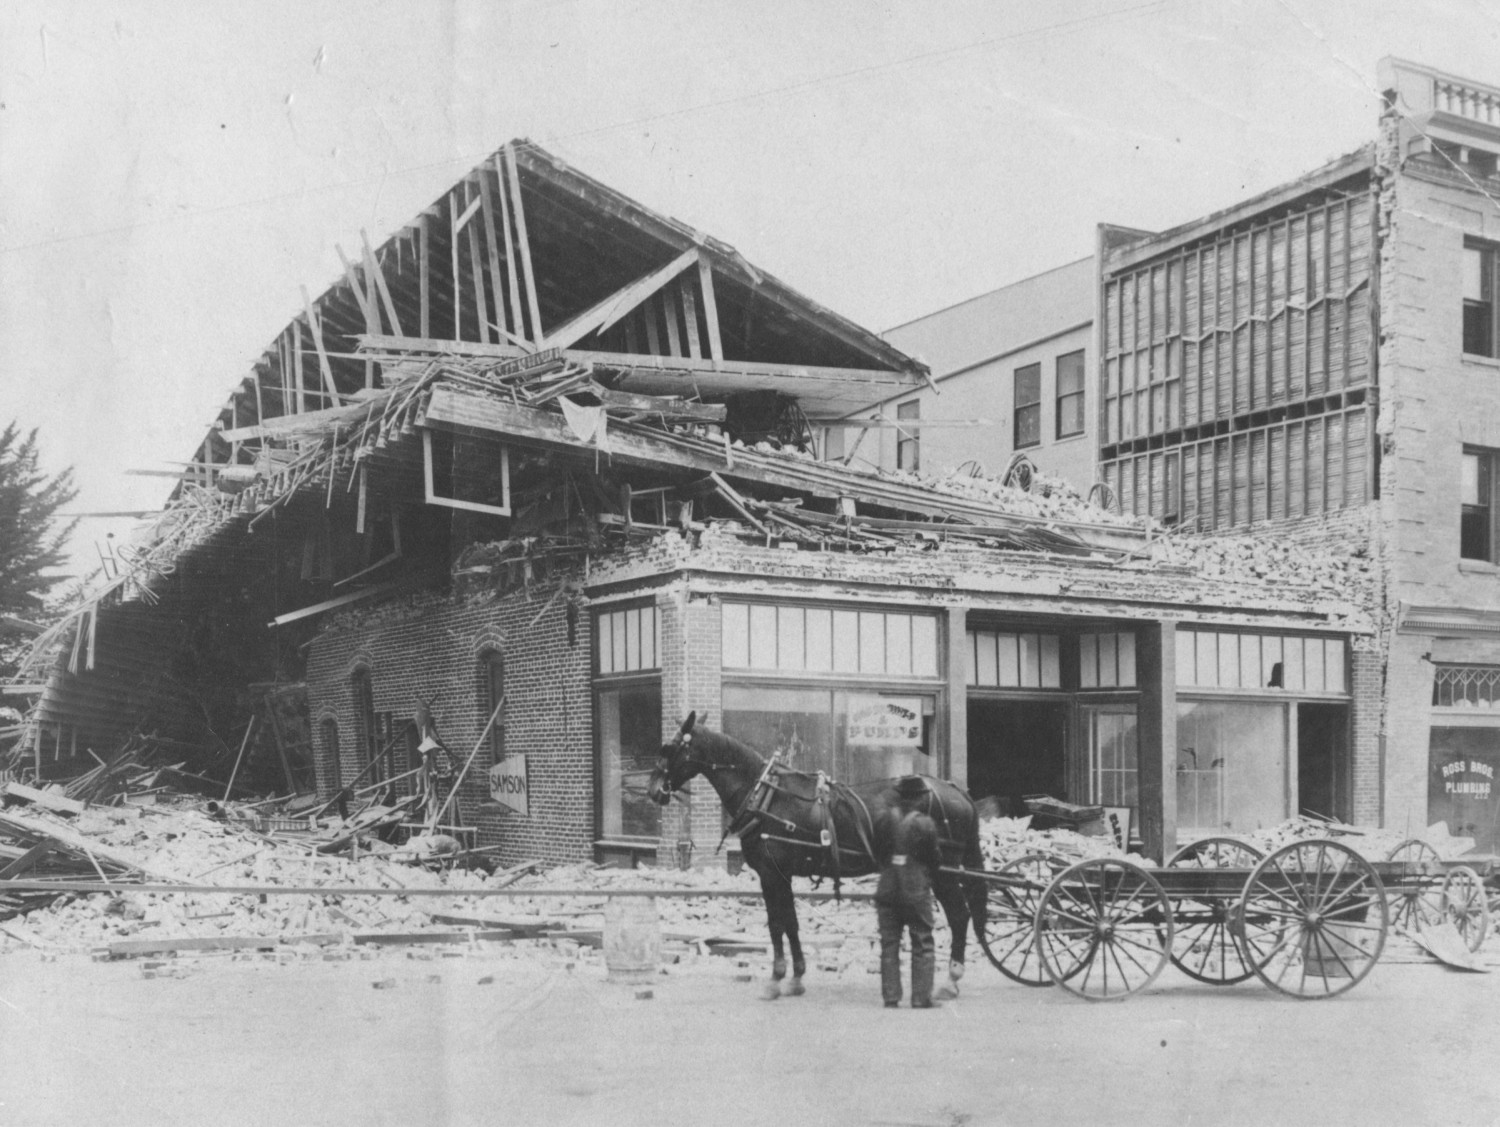 Wisnom's hardware after the 1906 earthquake